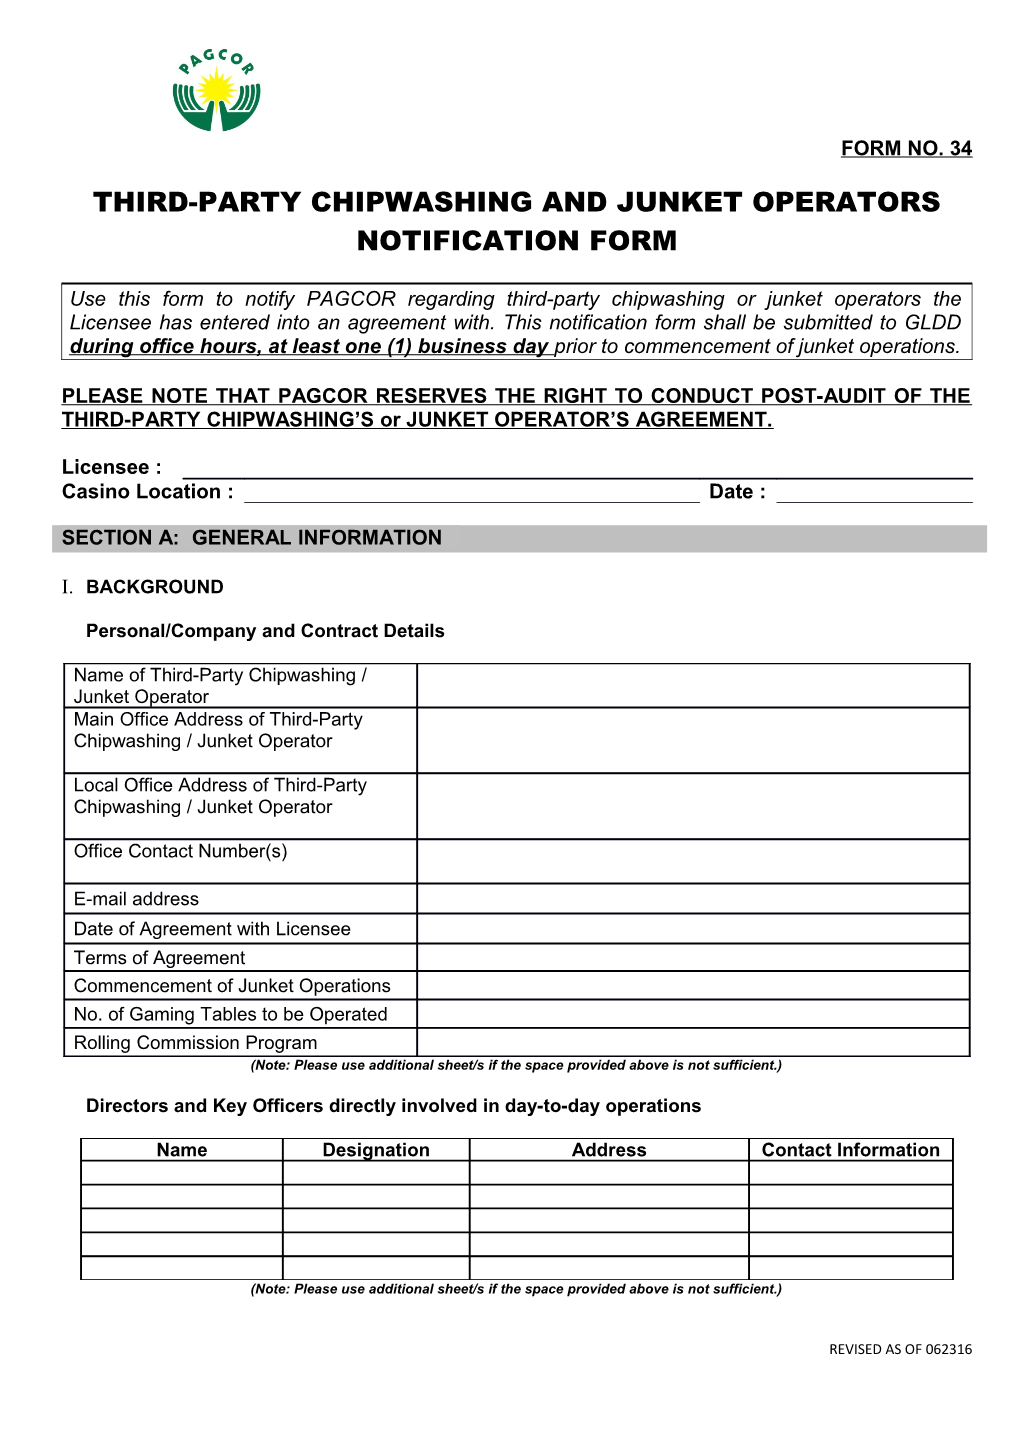 Third-Party Chipwashing and Junket Operators Notification Form